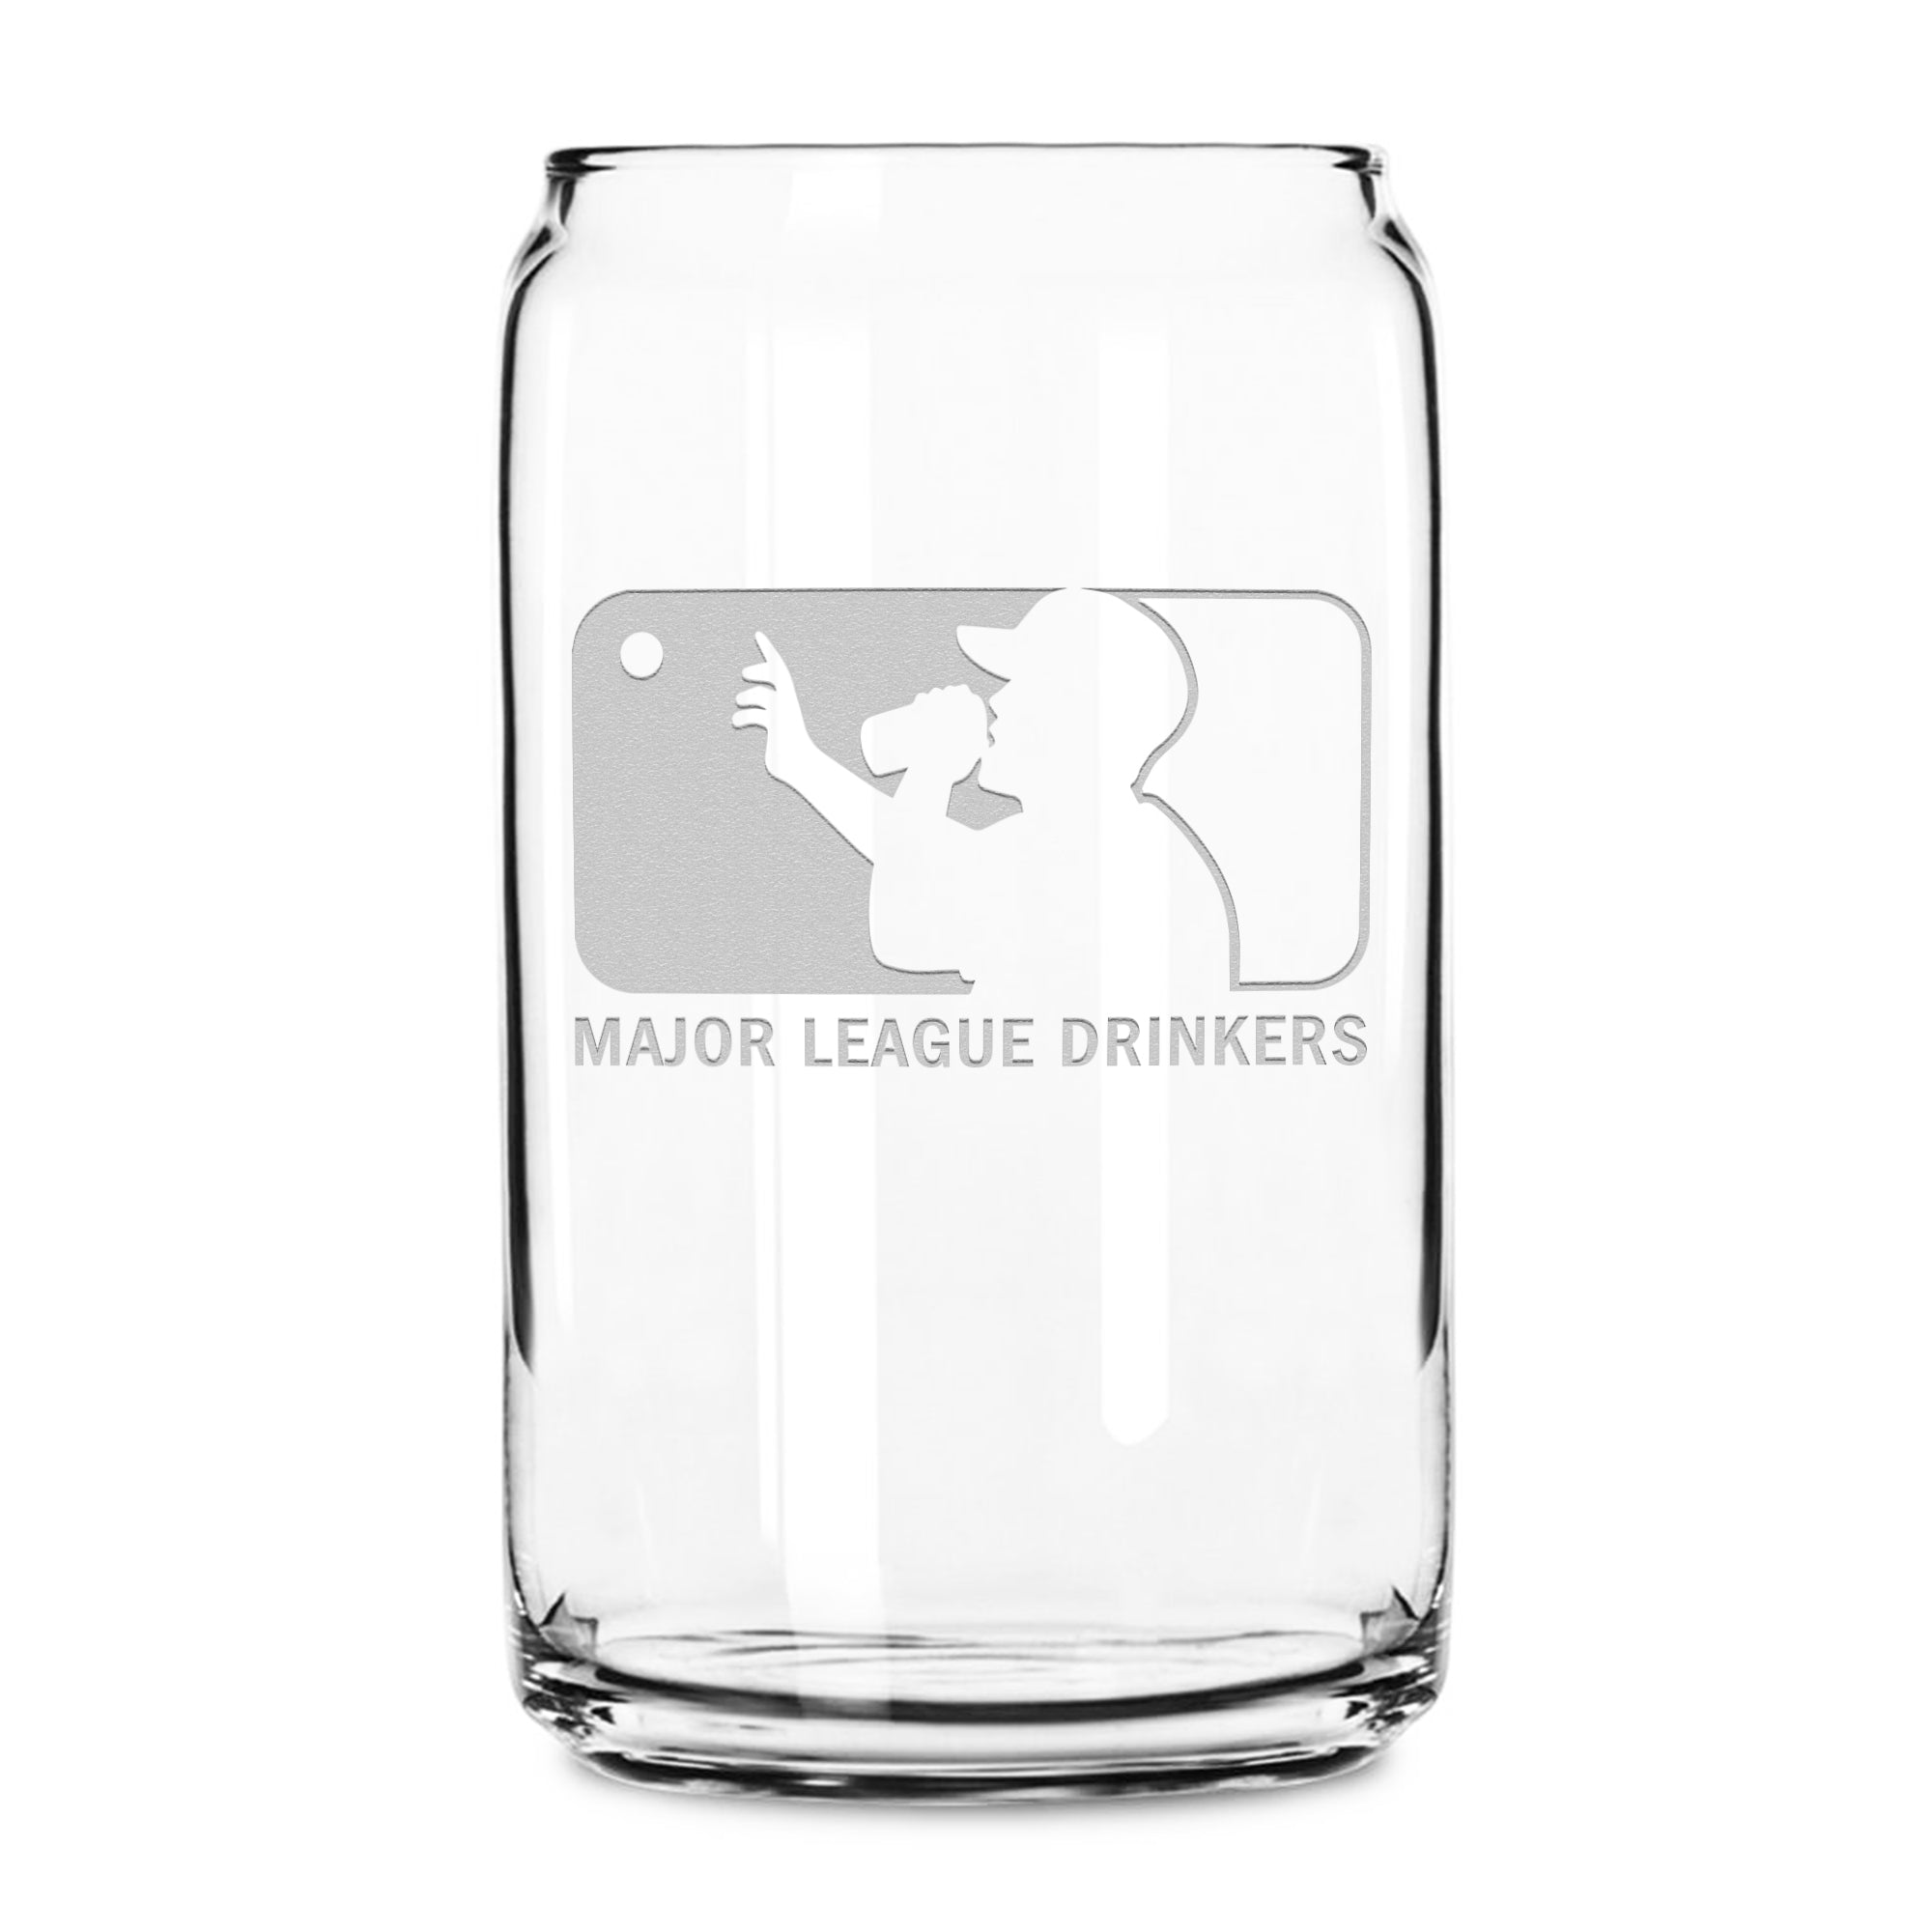 Integrity Bottles Major League Drinkers, Premium Beer Can Glass, Handmade, Handblown, Laser Etched or Hand Etched Gifts, Sand Carved, 16oz, Laser Etched or Hand Etched